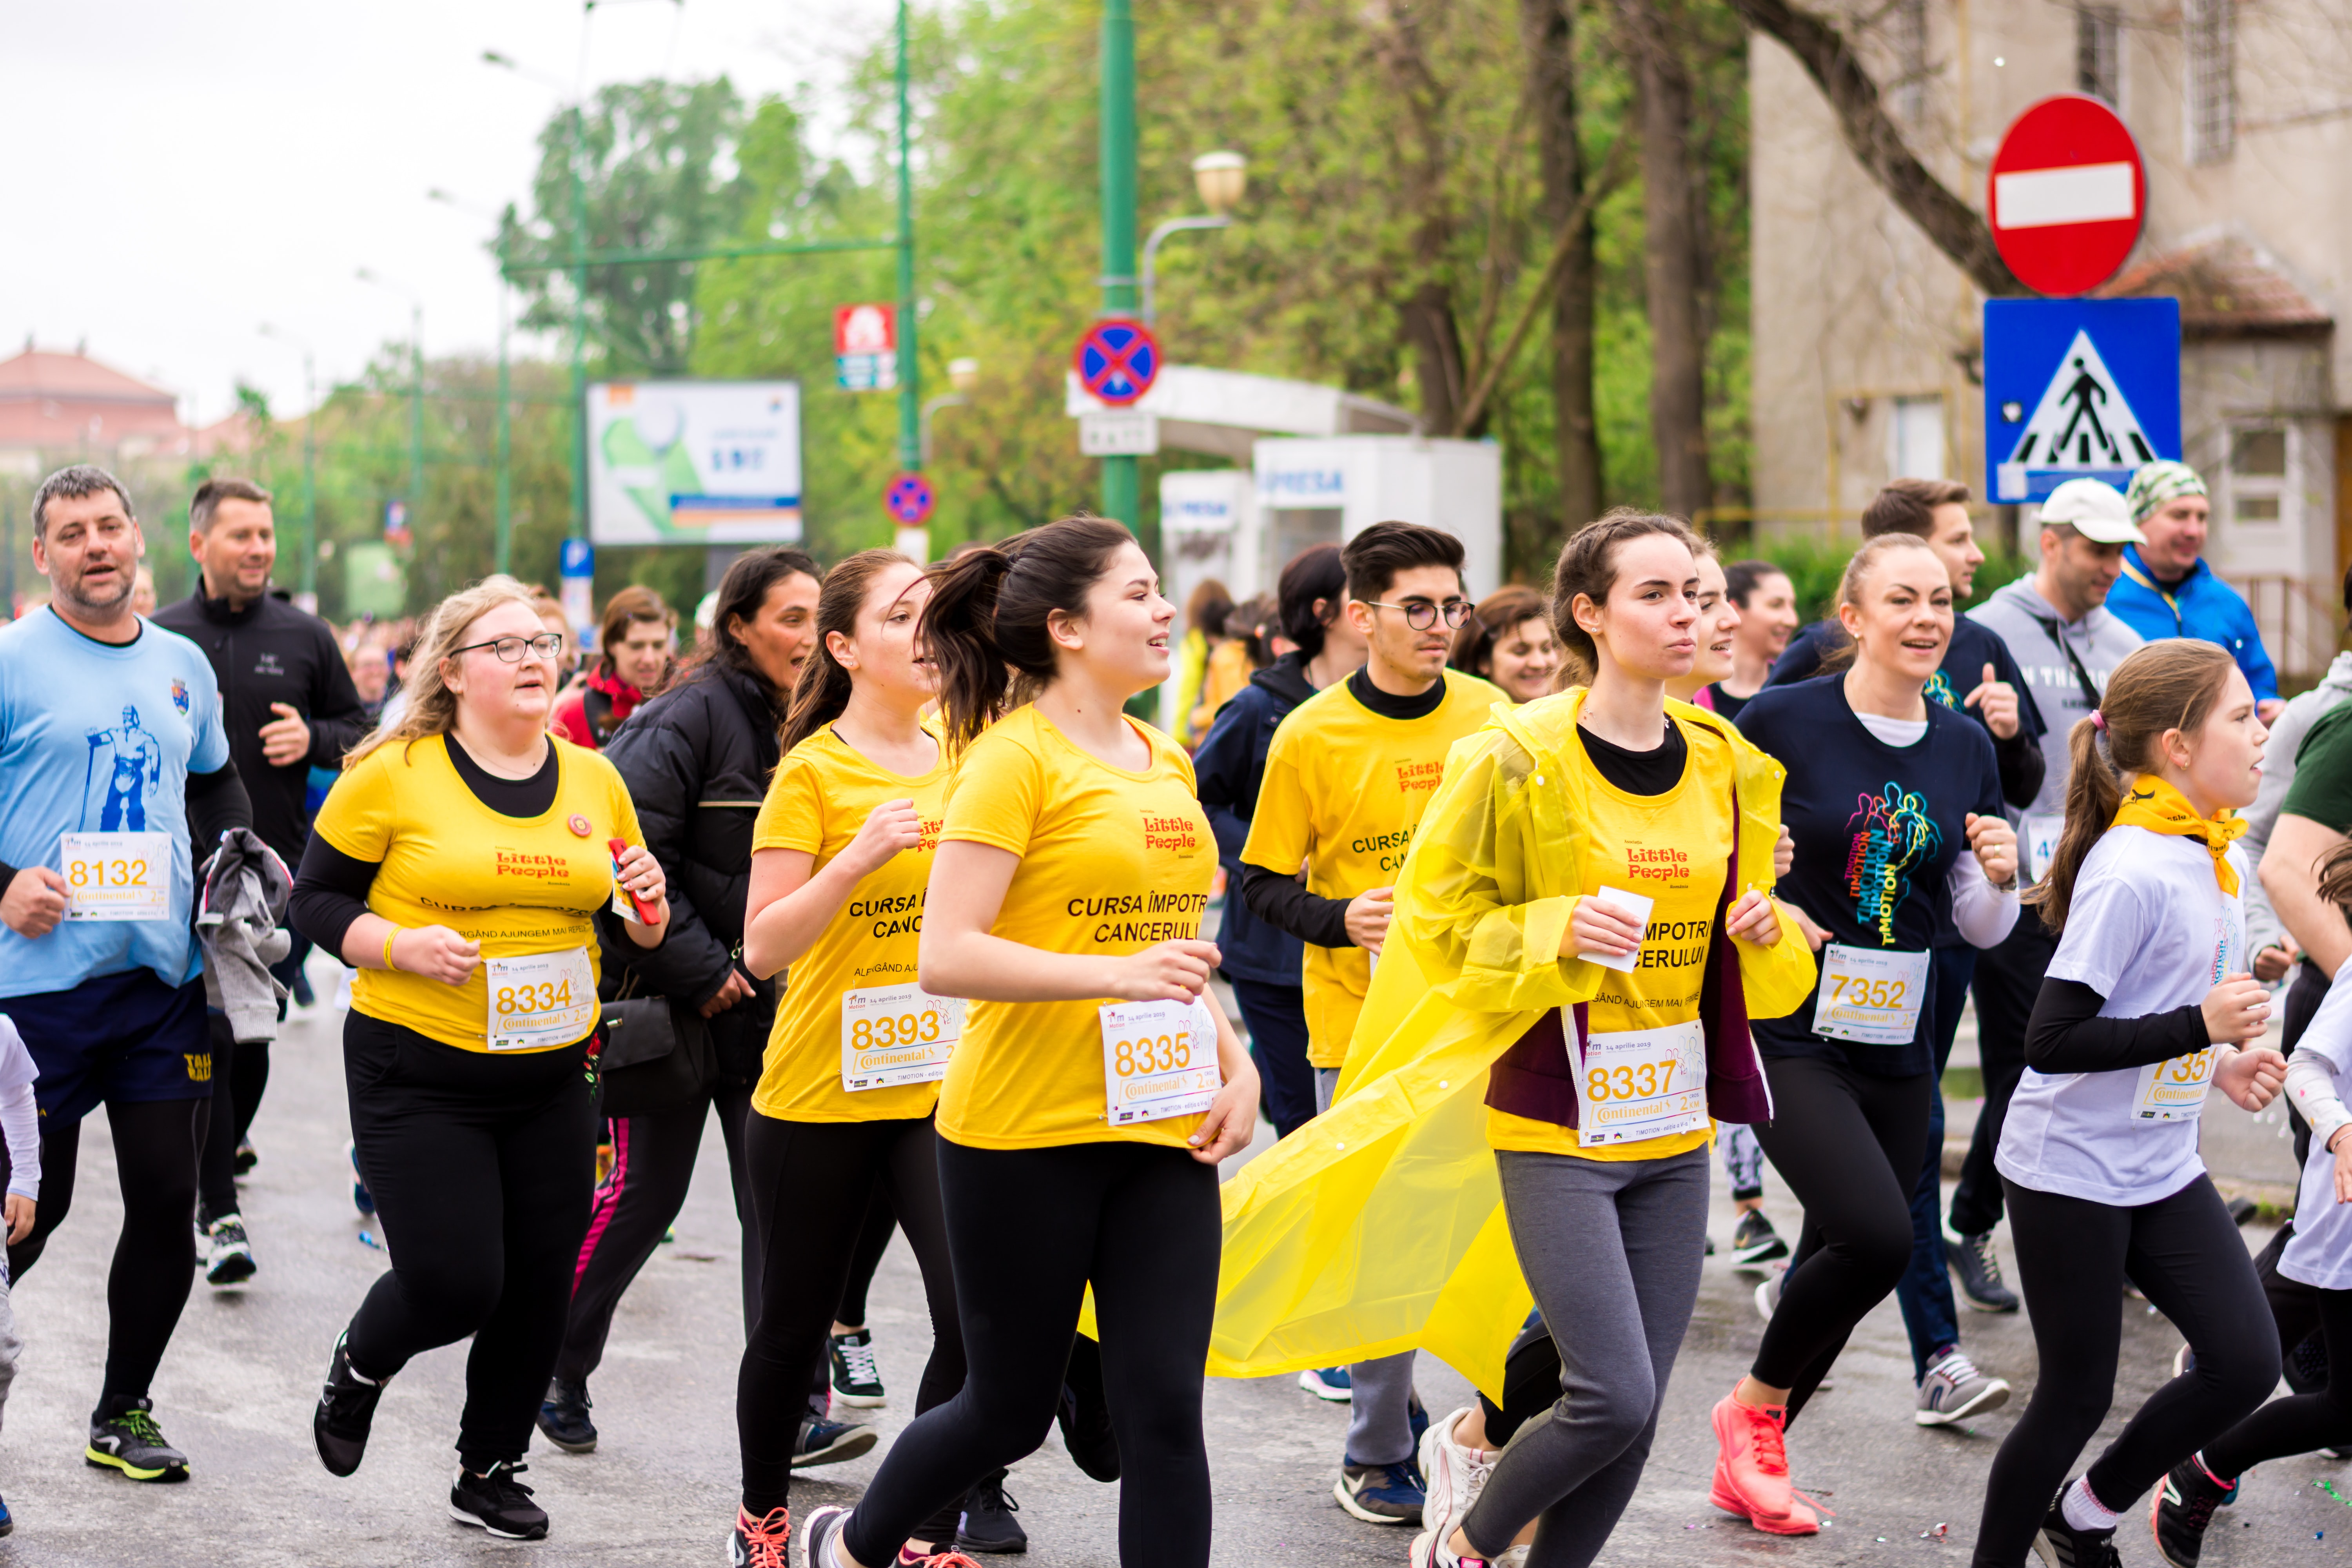 A large group of people wearing the same event shirt run together in a race.